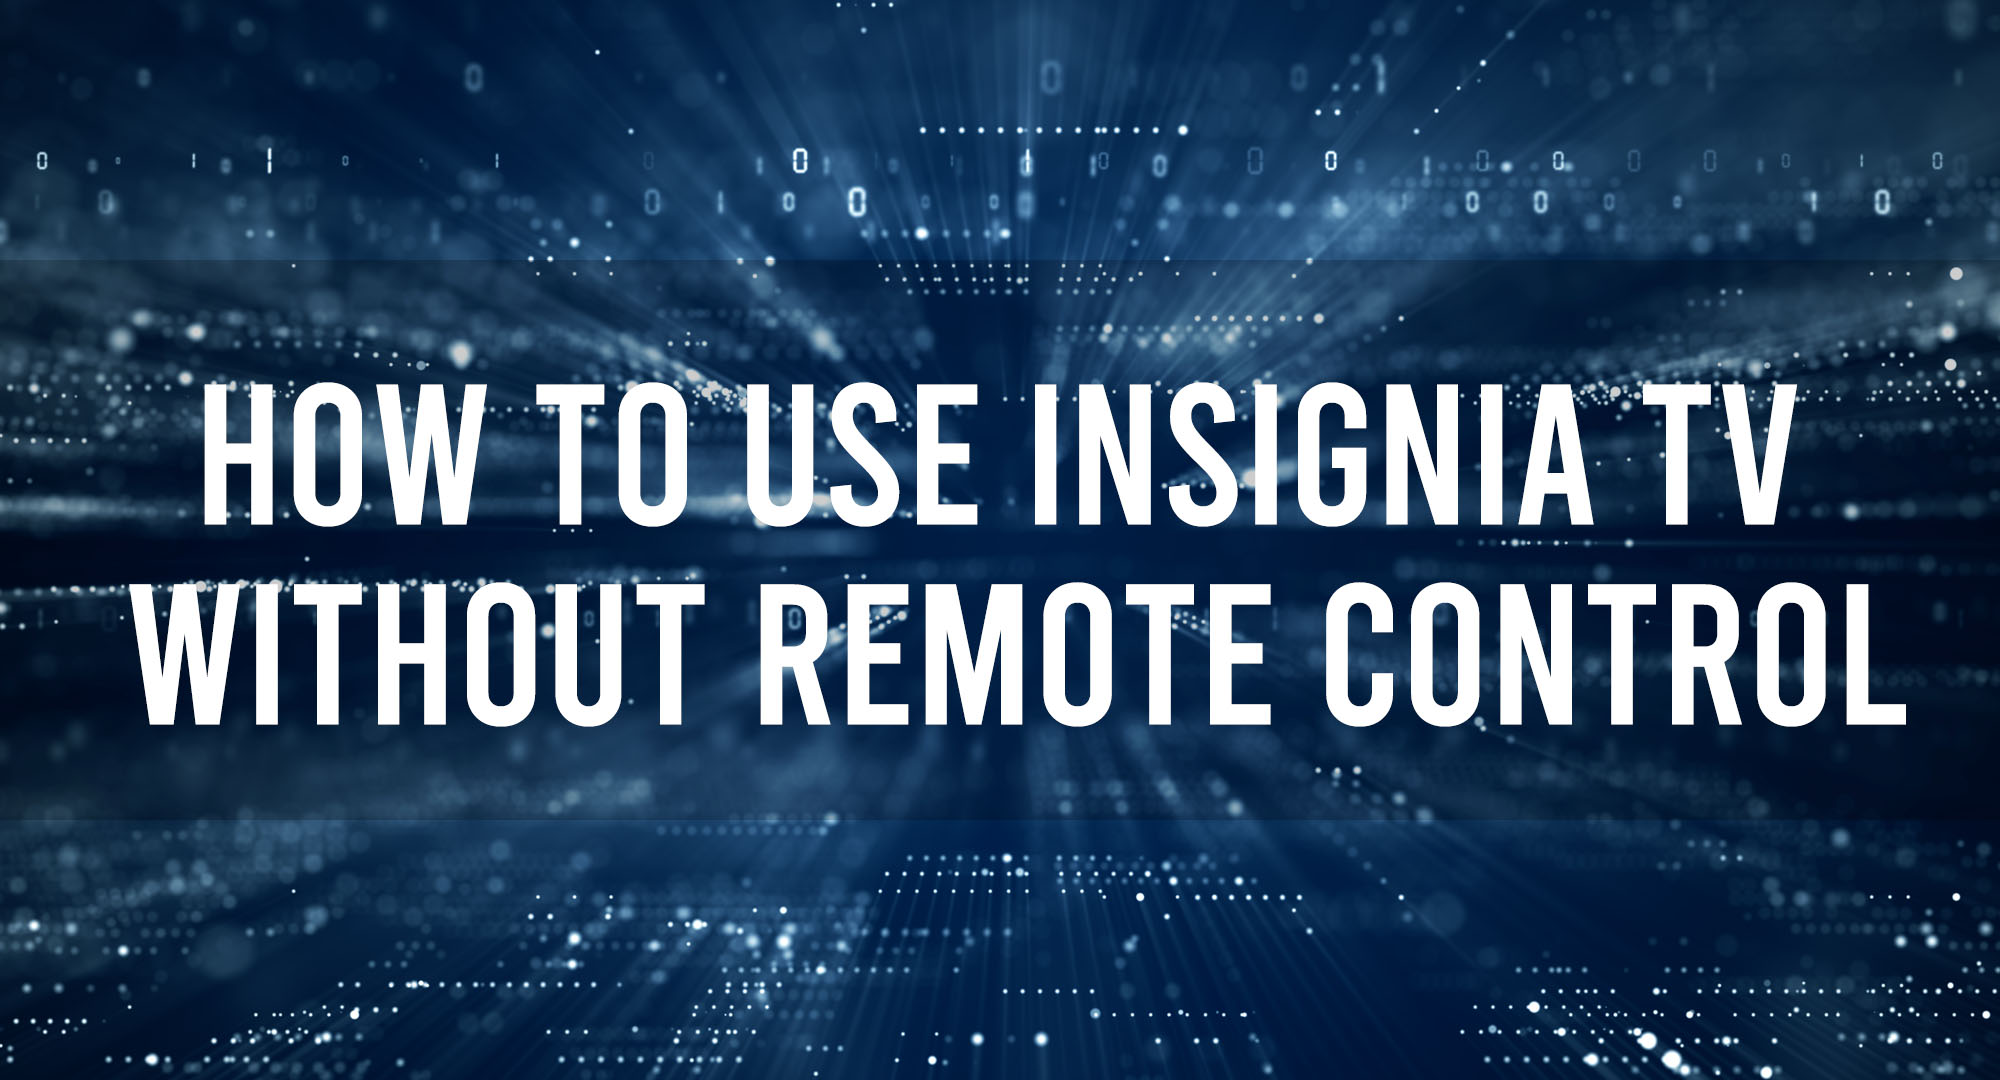 How to use insignia tv without remote control